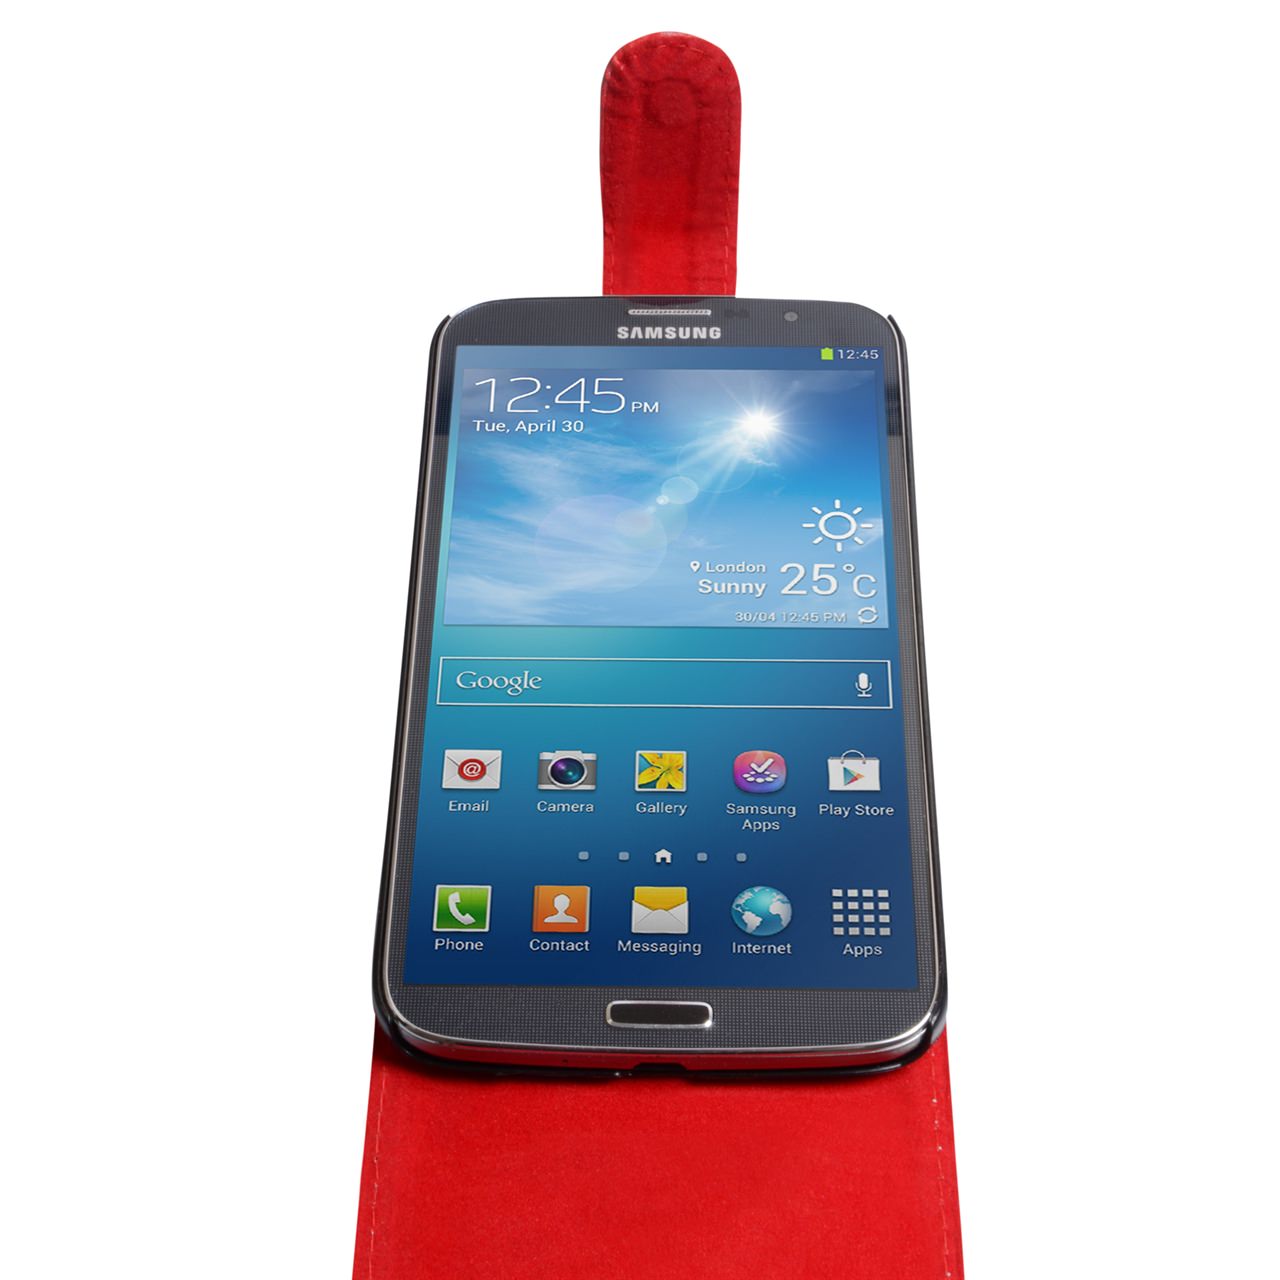 YouSave Samsung Galaxy Mega 6.3 Leather Effect Flip Case - Red